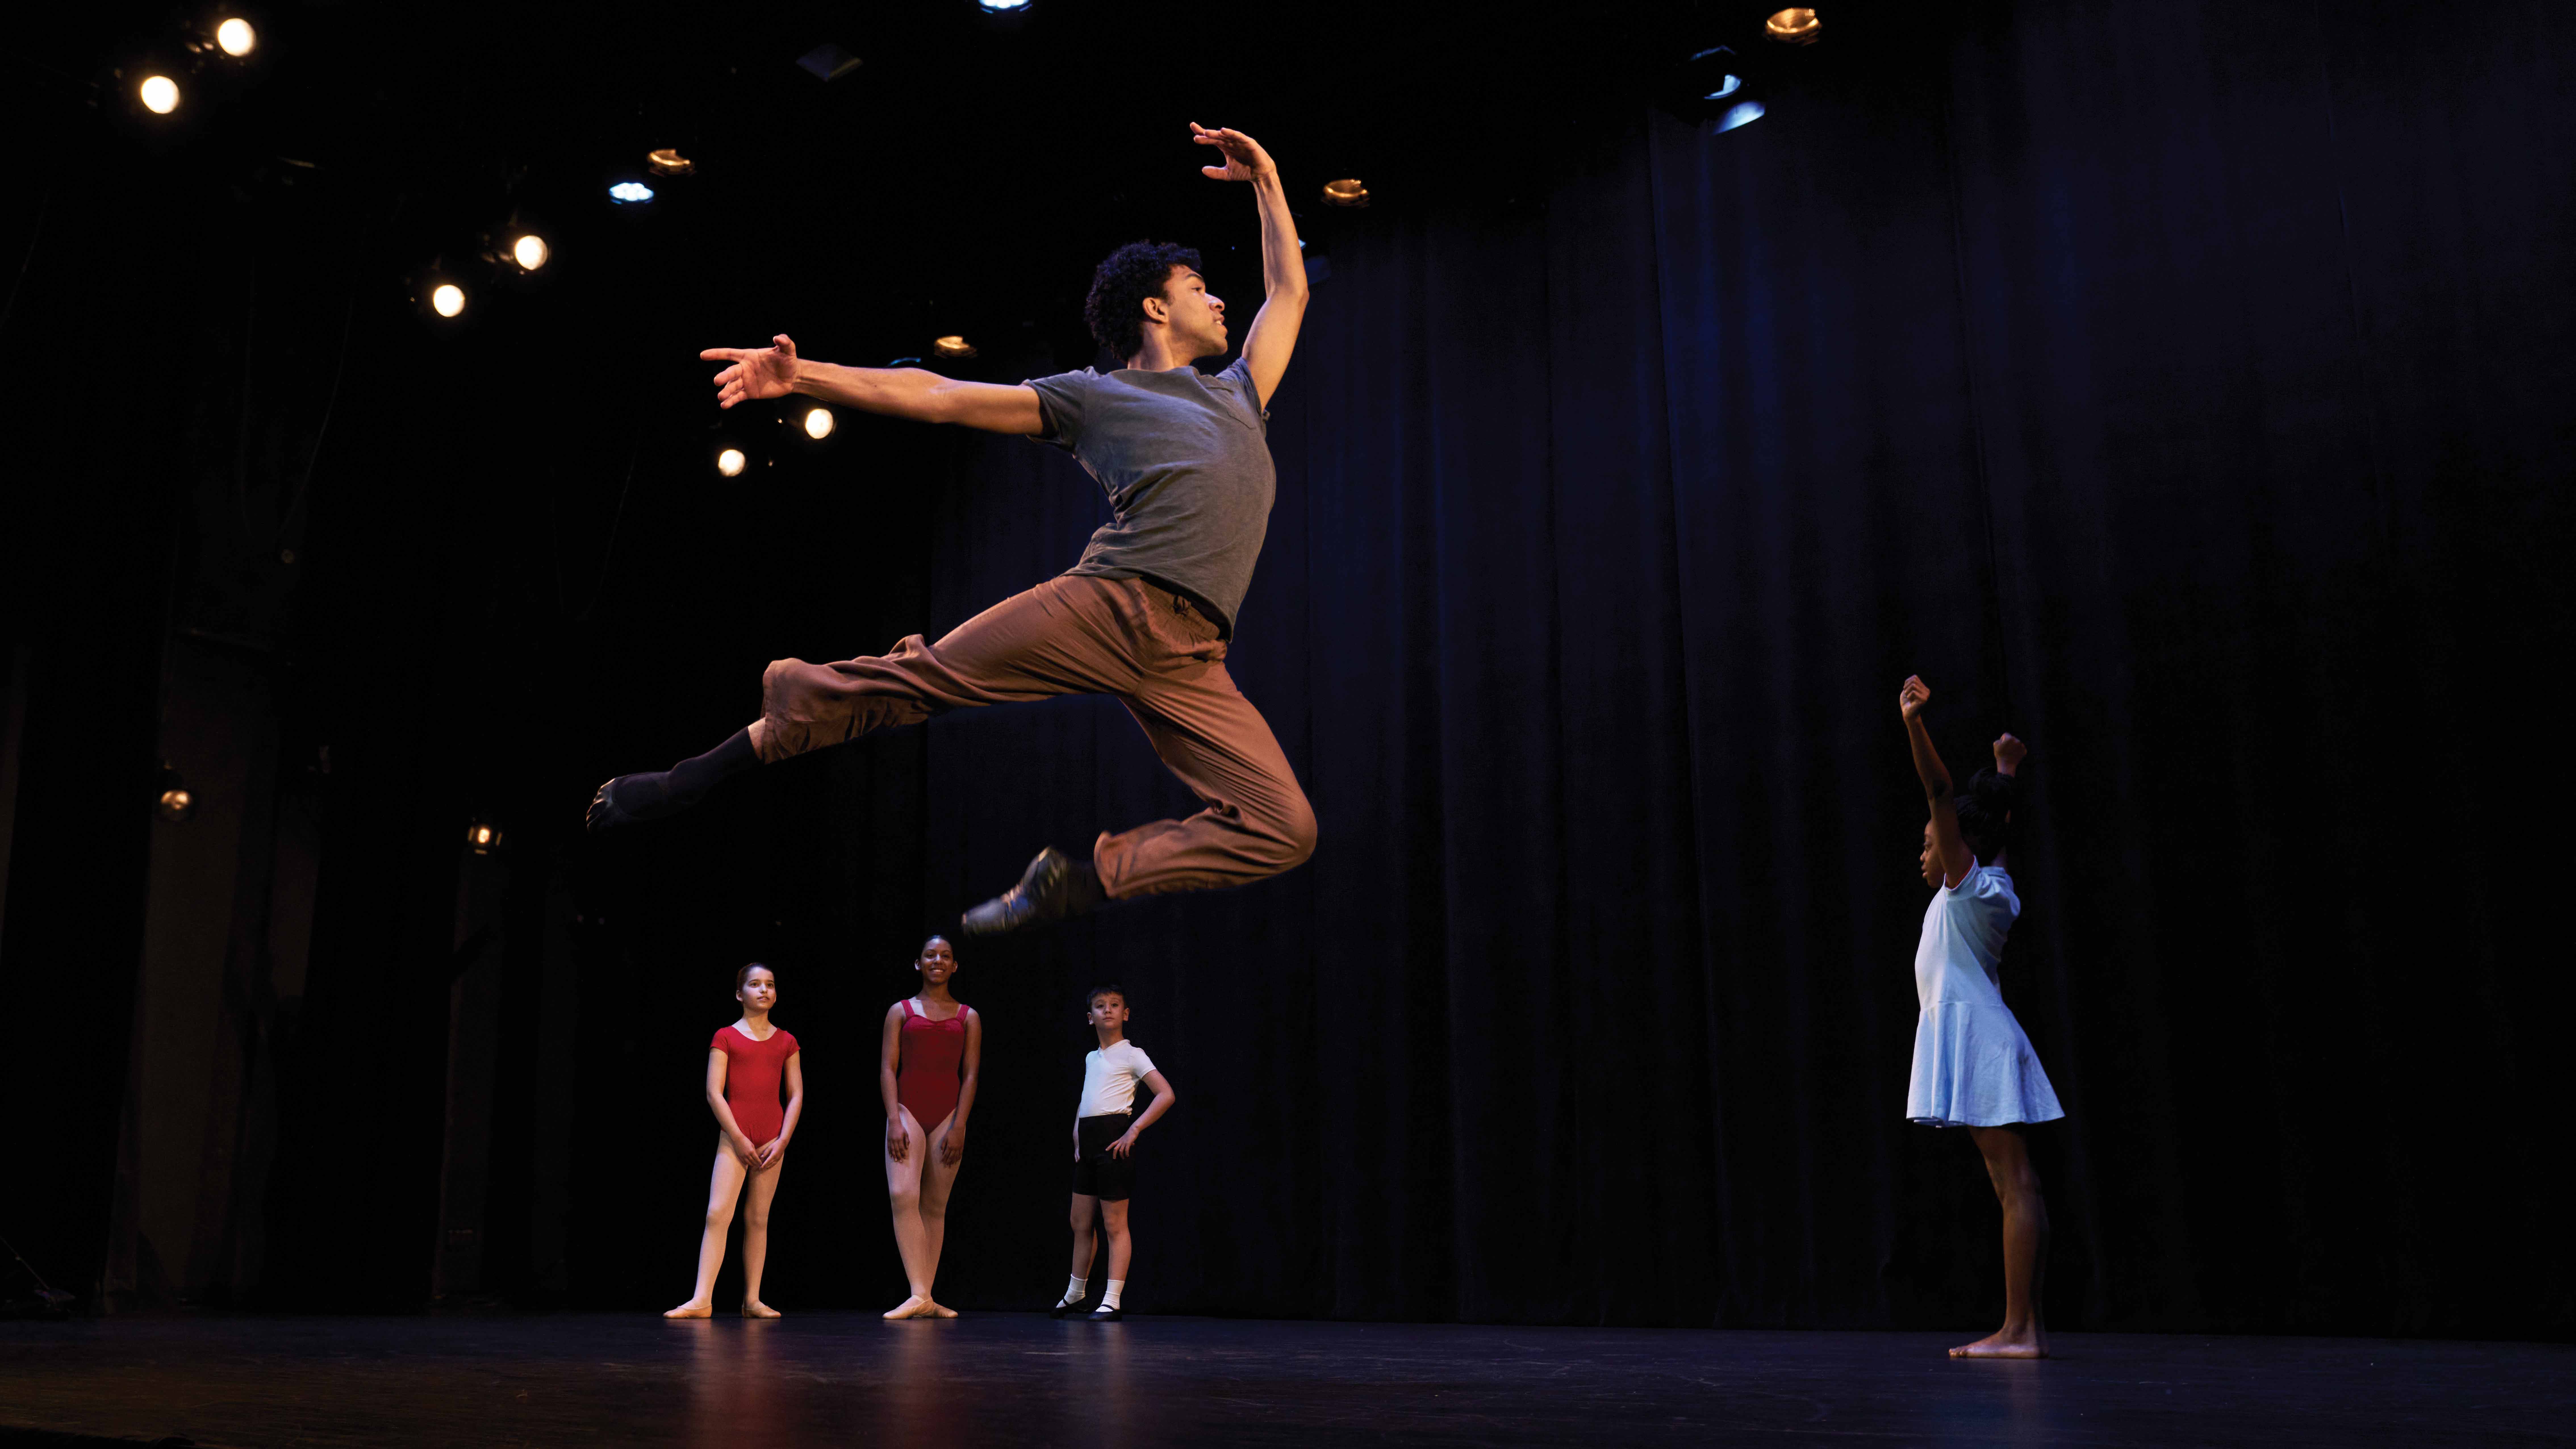 Image of young man leaping in dance